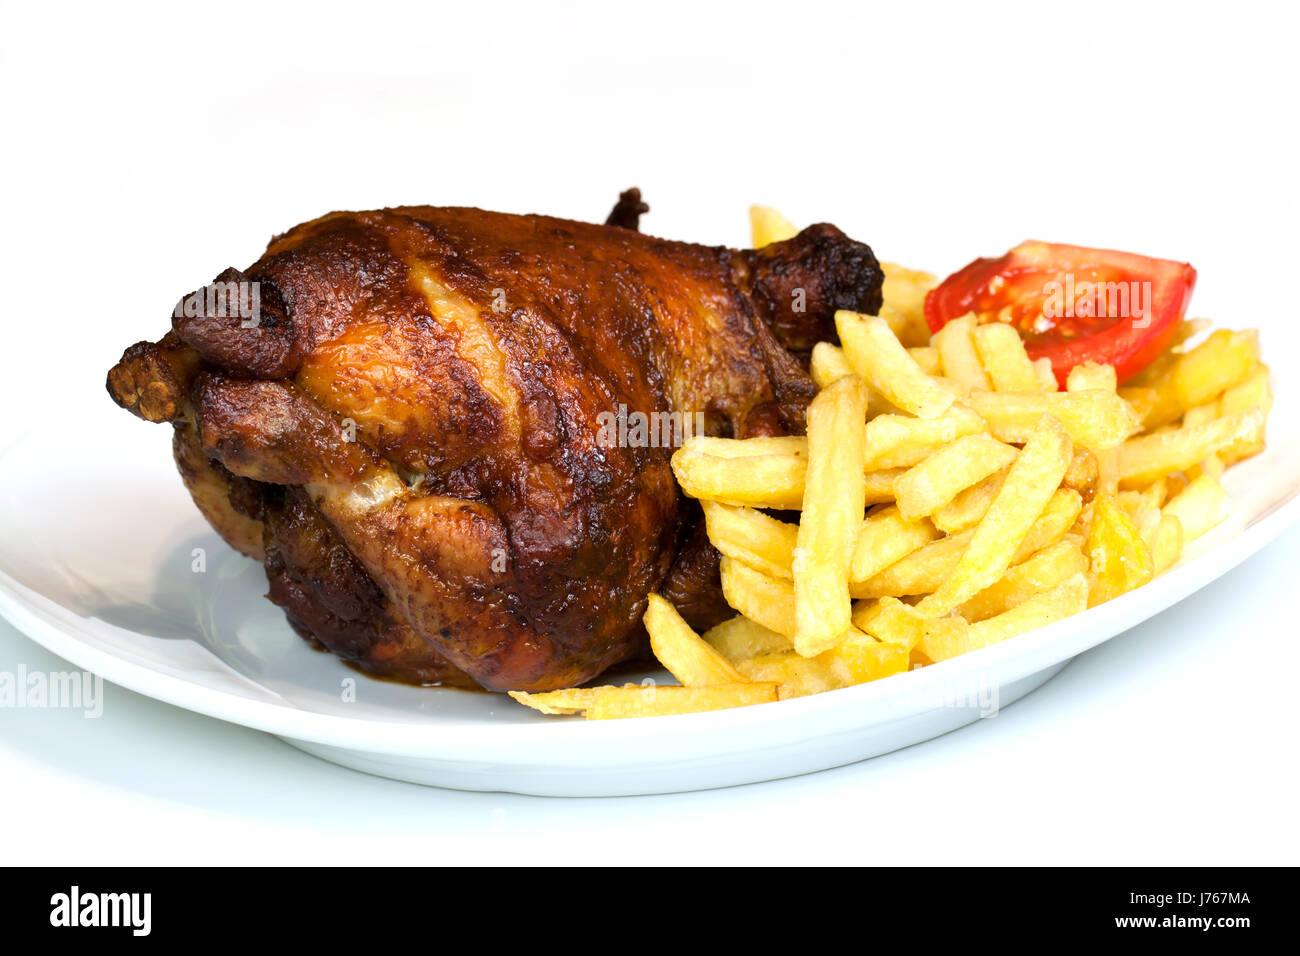 Halbes Haehnchen High Resolution Stock Photography and Images - Alamy